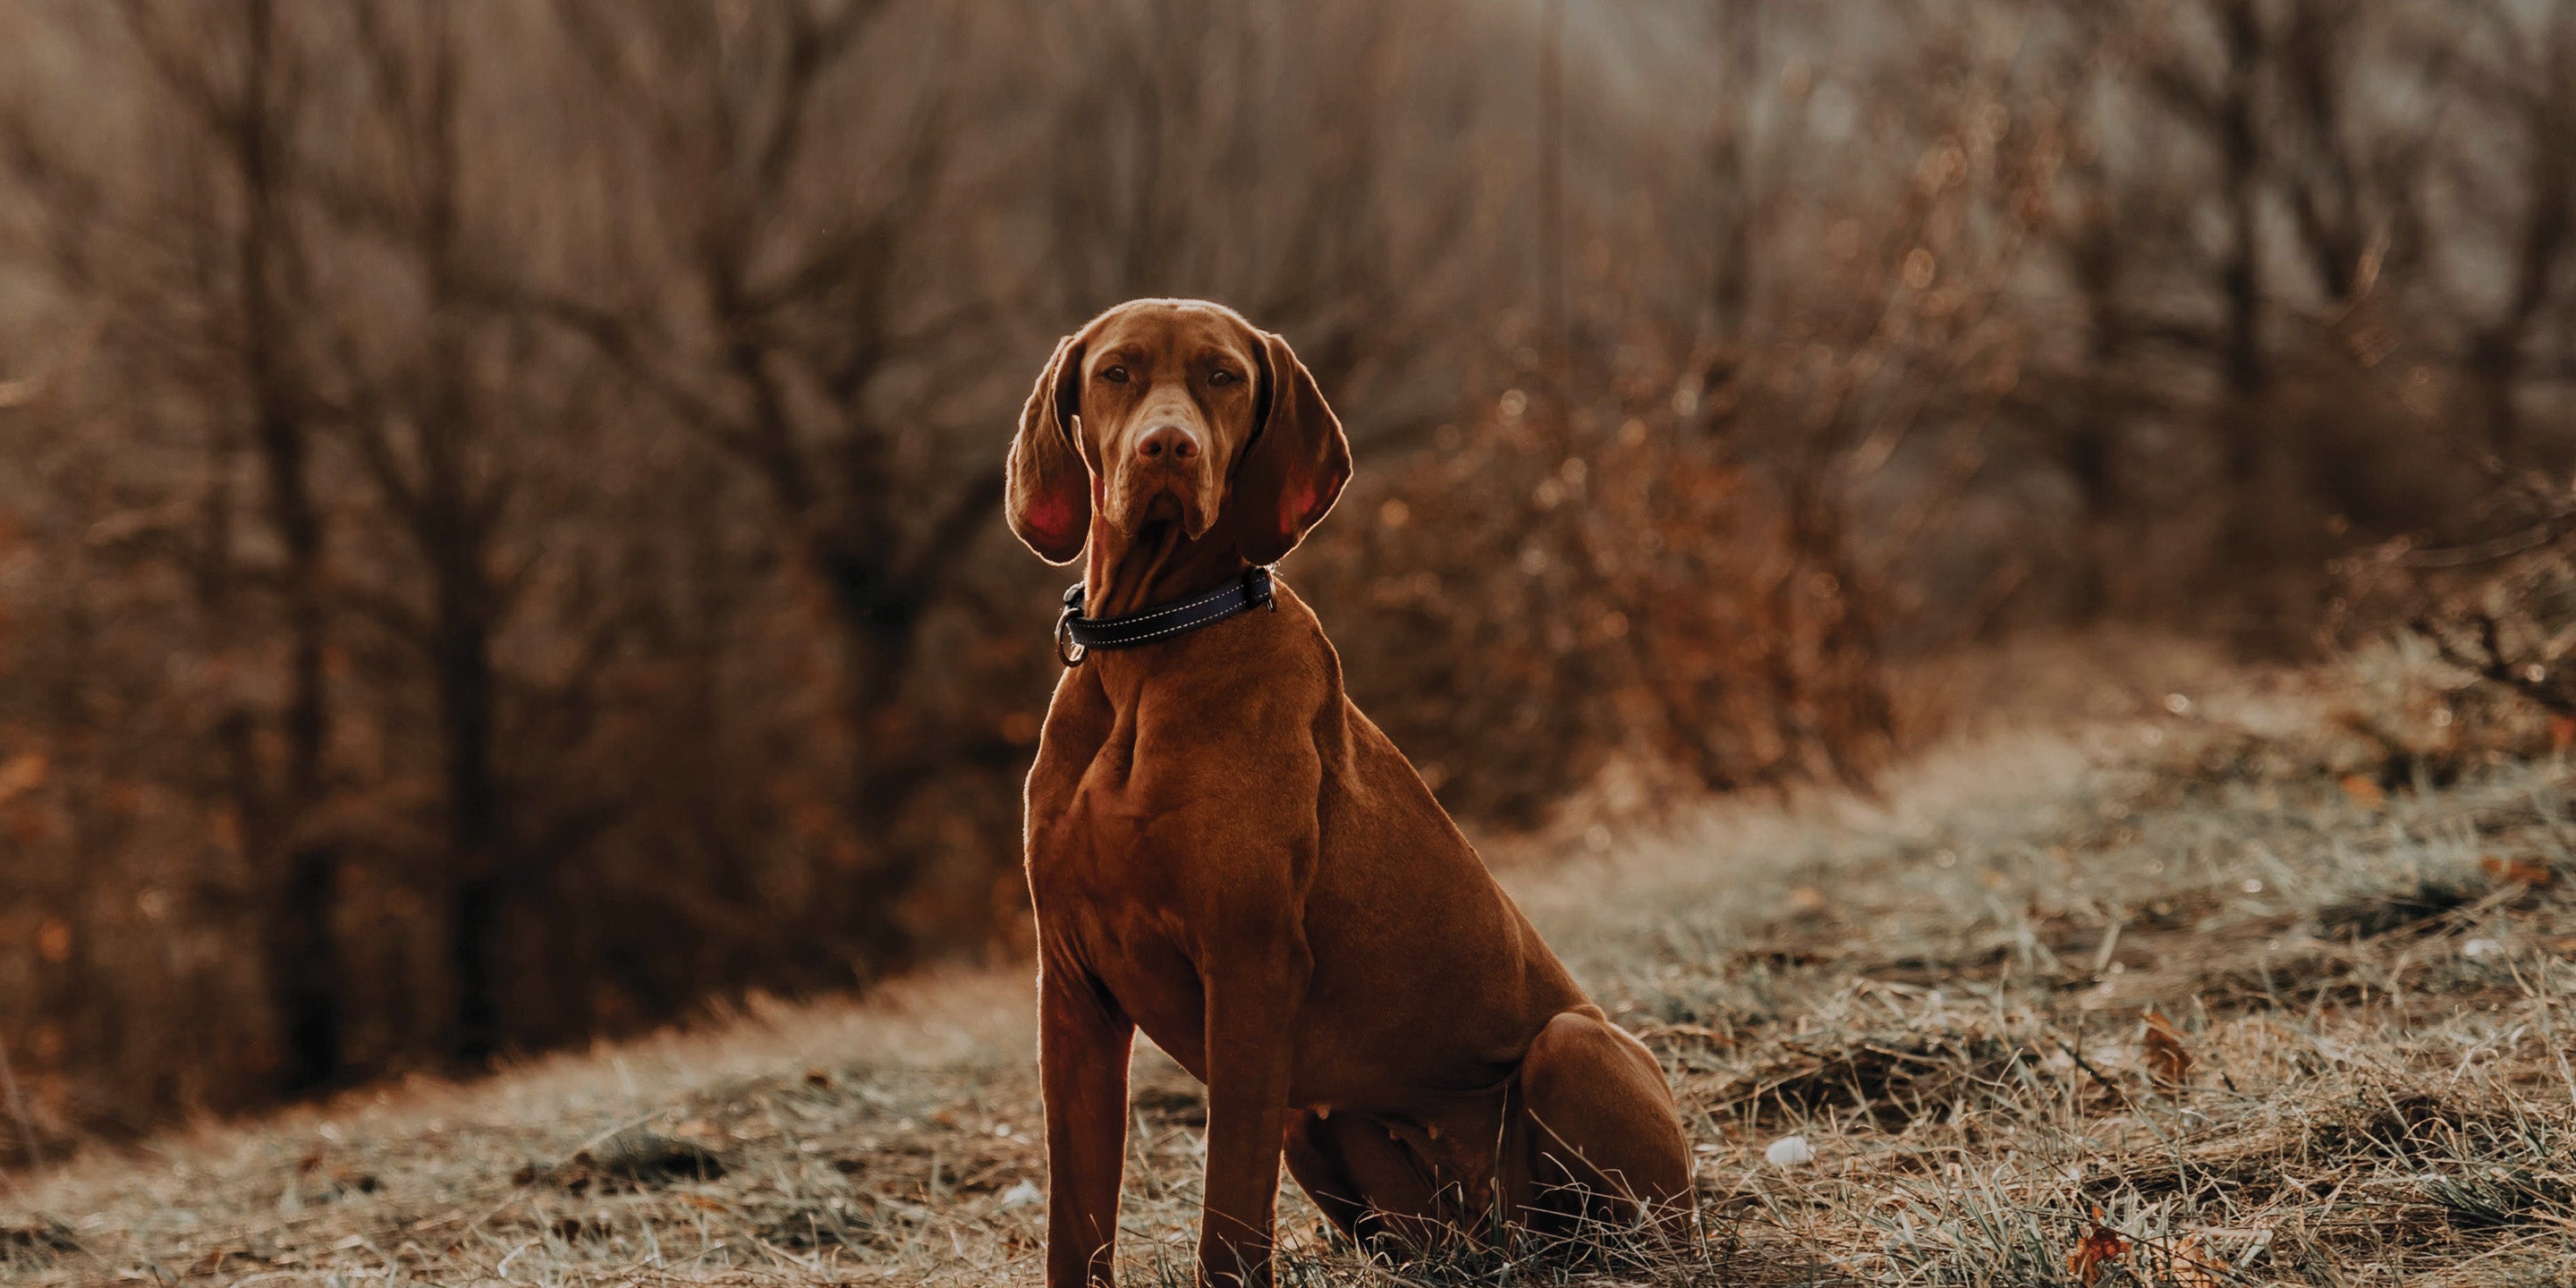 A brown dog with a black collar sitting in a field with frosty grass and trees in the background, likely in late autumn or winter.